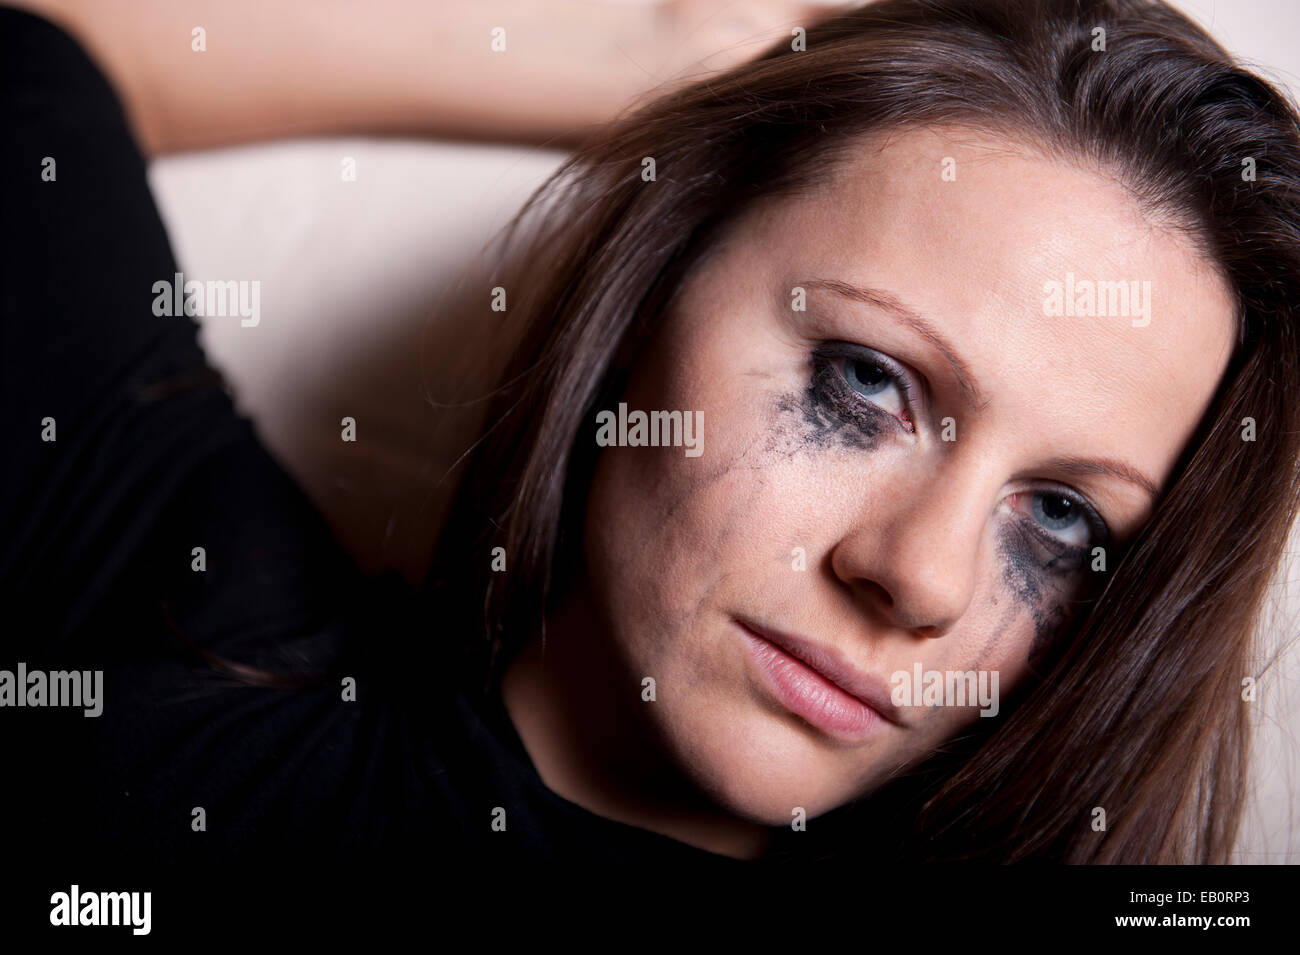 Close up portrait, of a very distraught young woman, with make up running down her face. Stock Photo